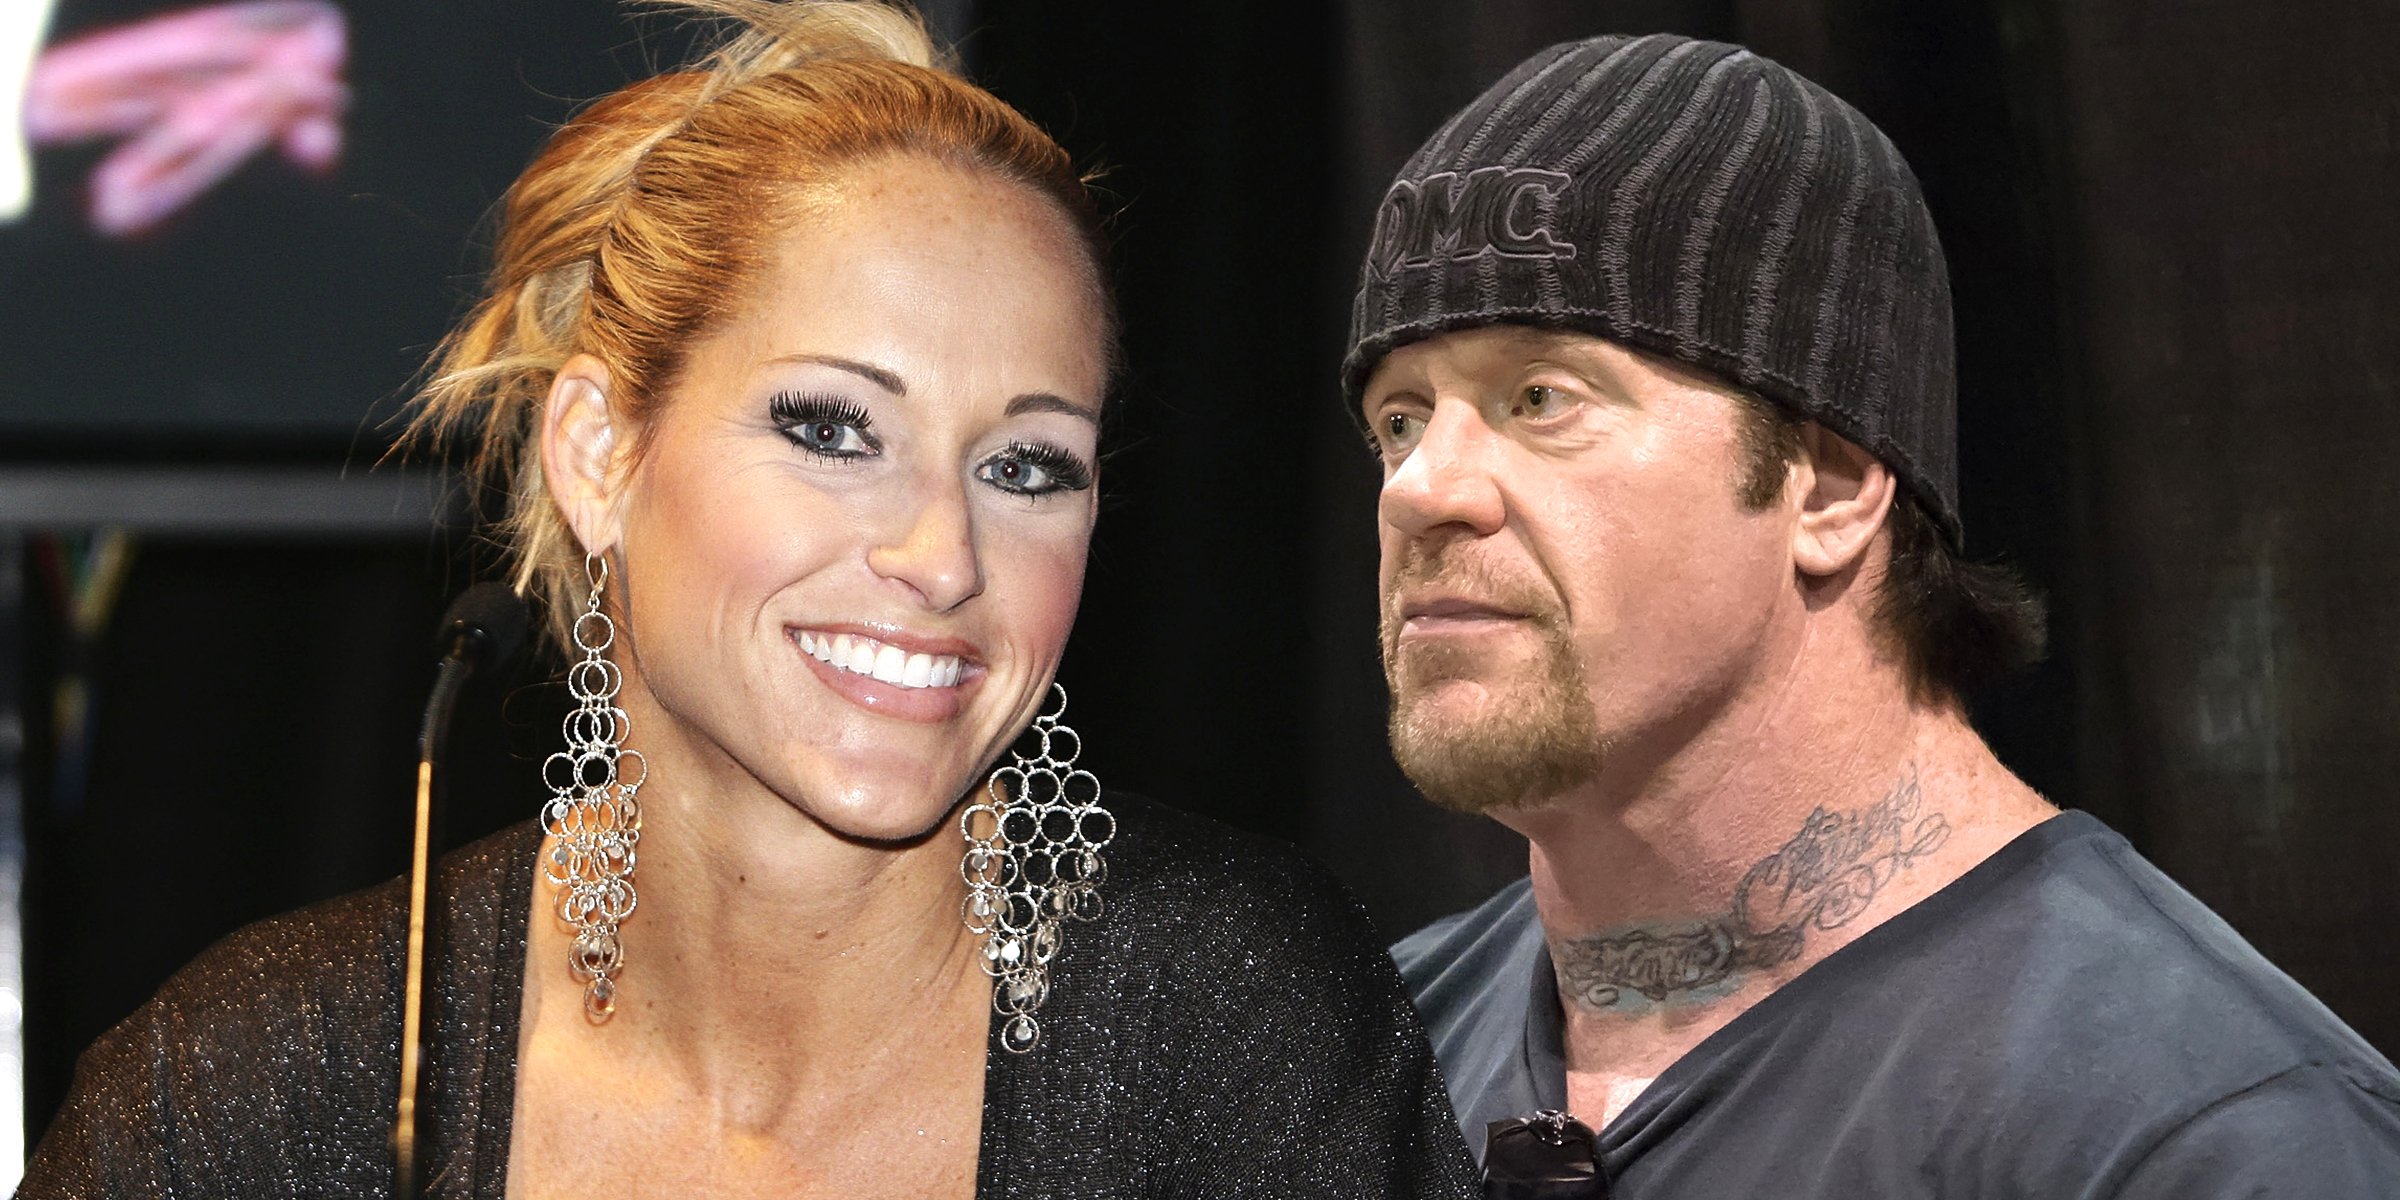 Michelle McCool and The Undertaker. | Source: Getty Images